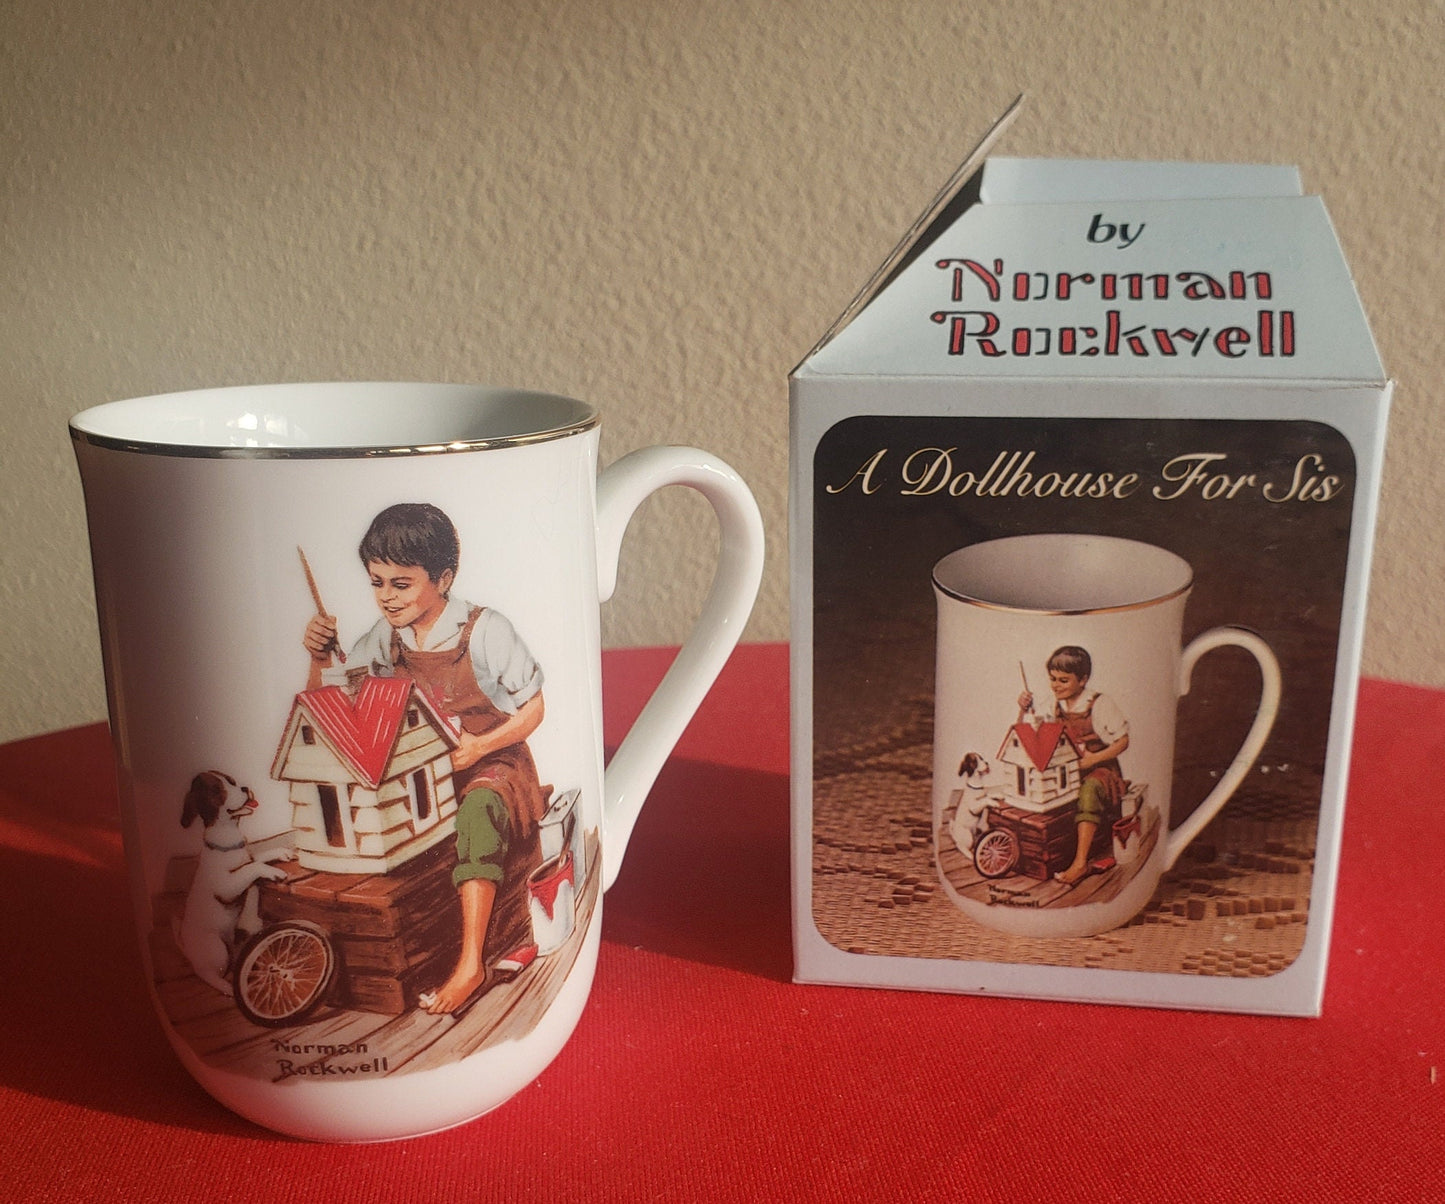 1983 Norman Rockwell Museum "A Dollhouse For Sis" Collectible Porcelain Mug